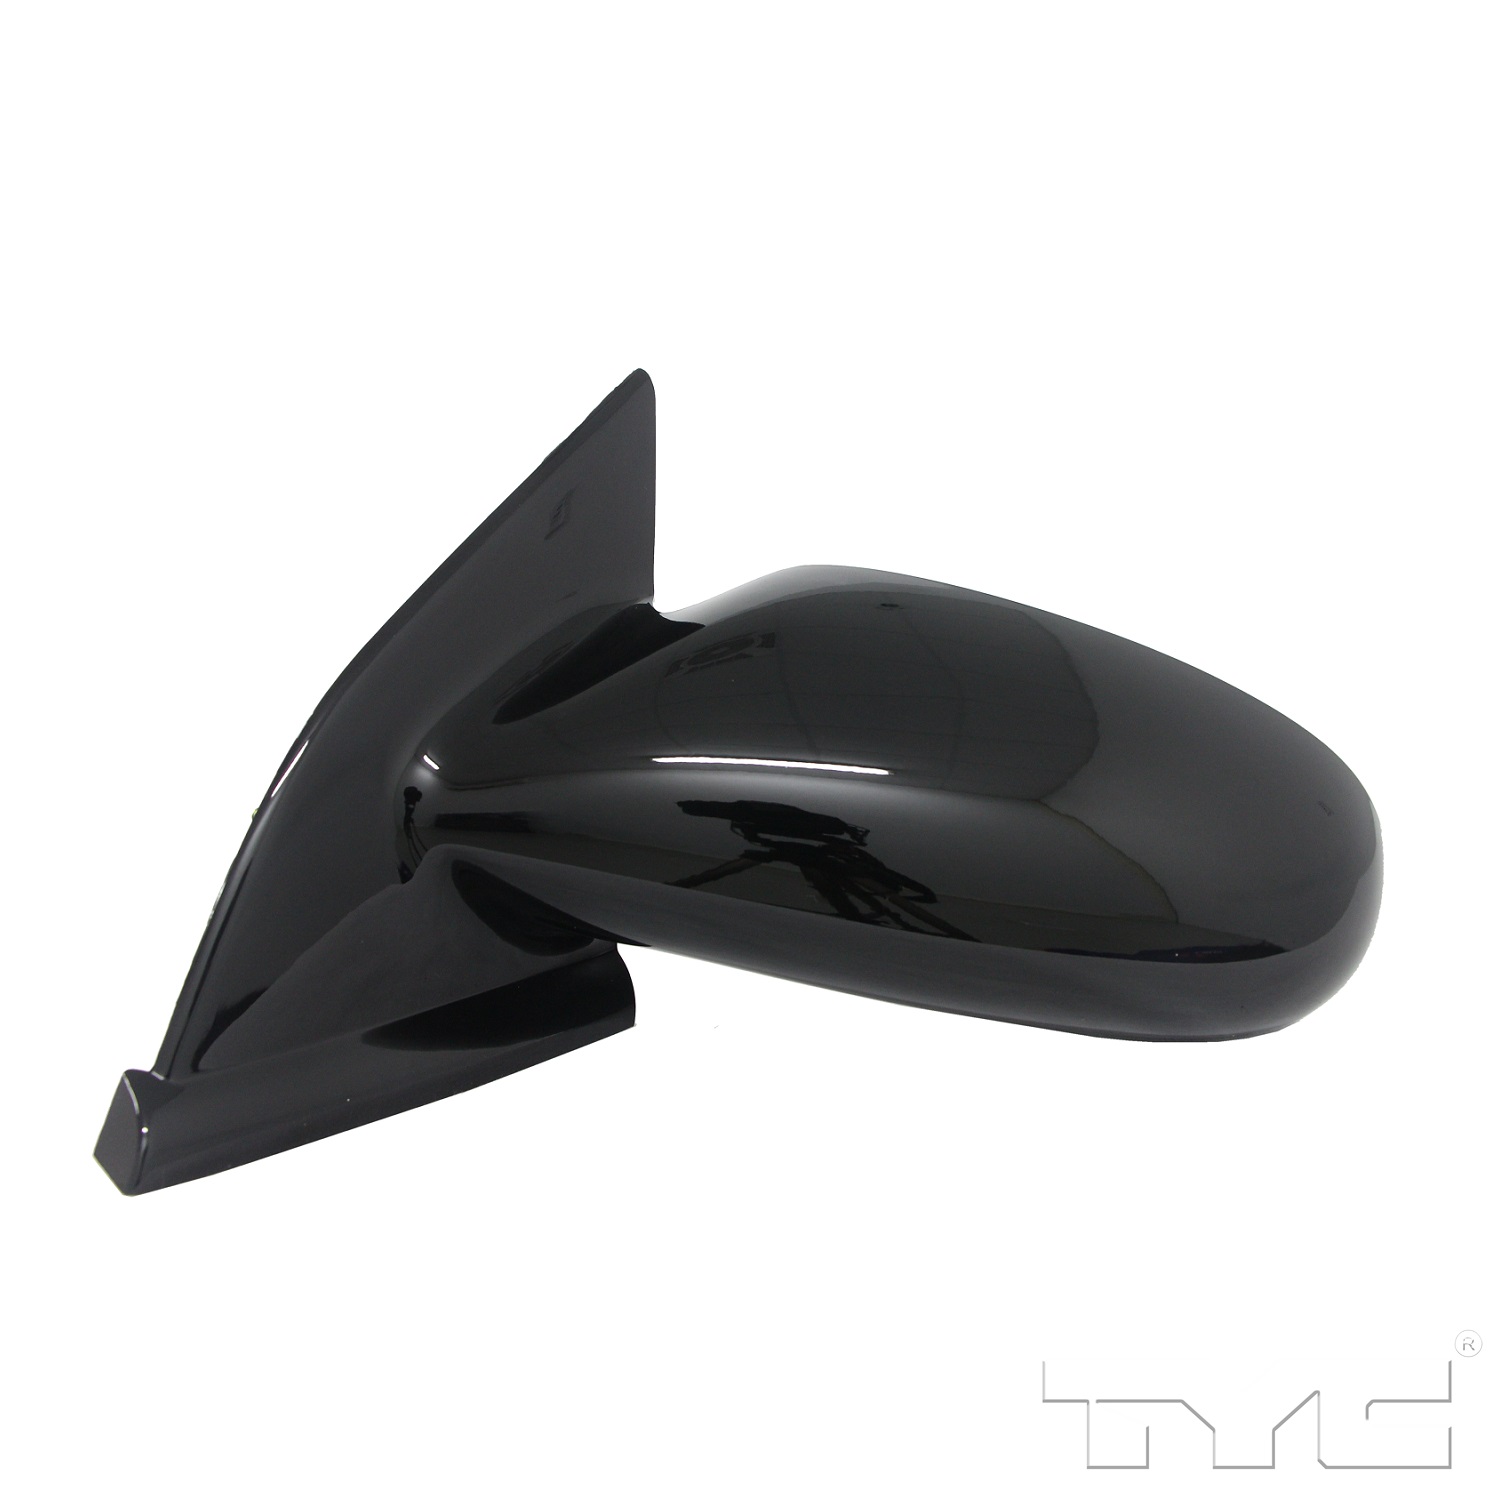 Aftermarket MIRRORS for SATURN - SL, SL,96-02,LT Mirror outside rear view